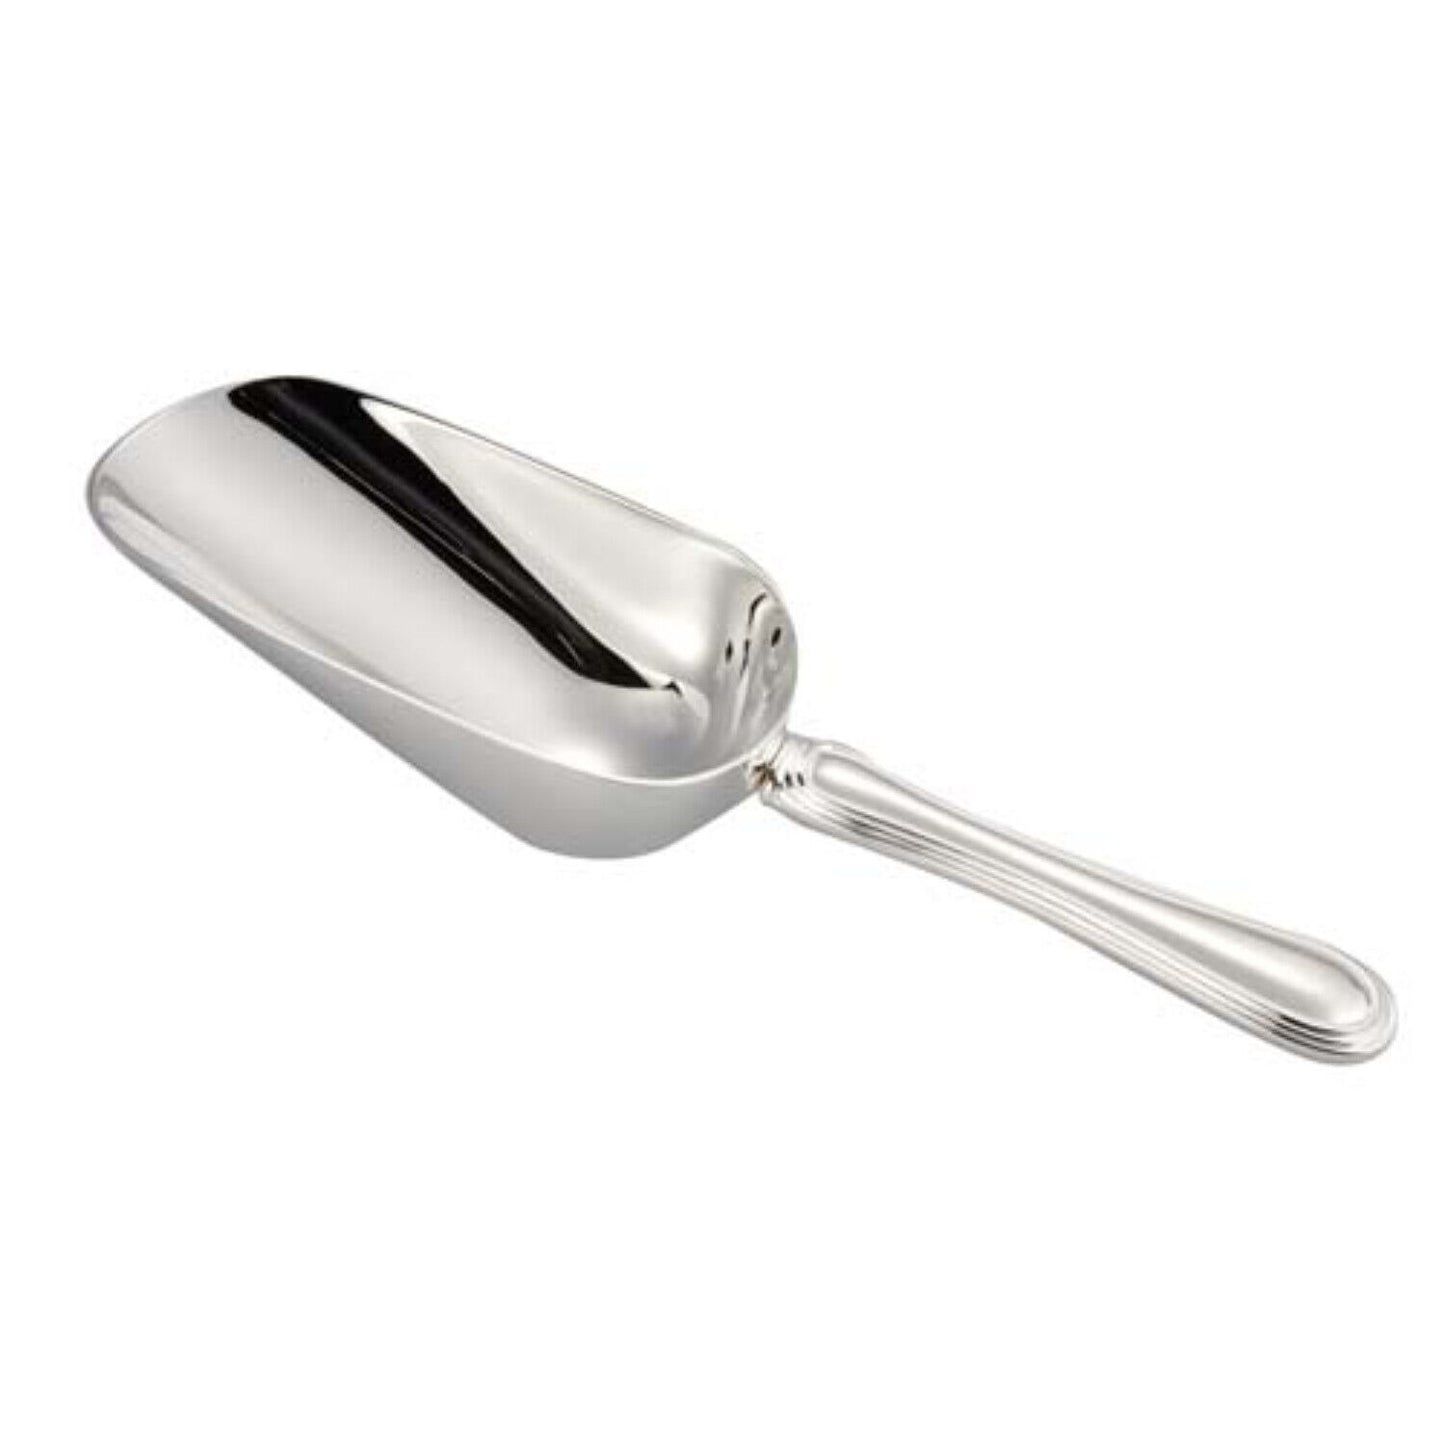 Silver Plated Rim Ice Scoop